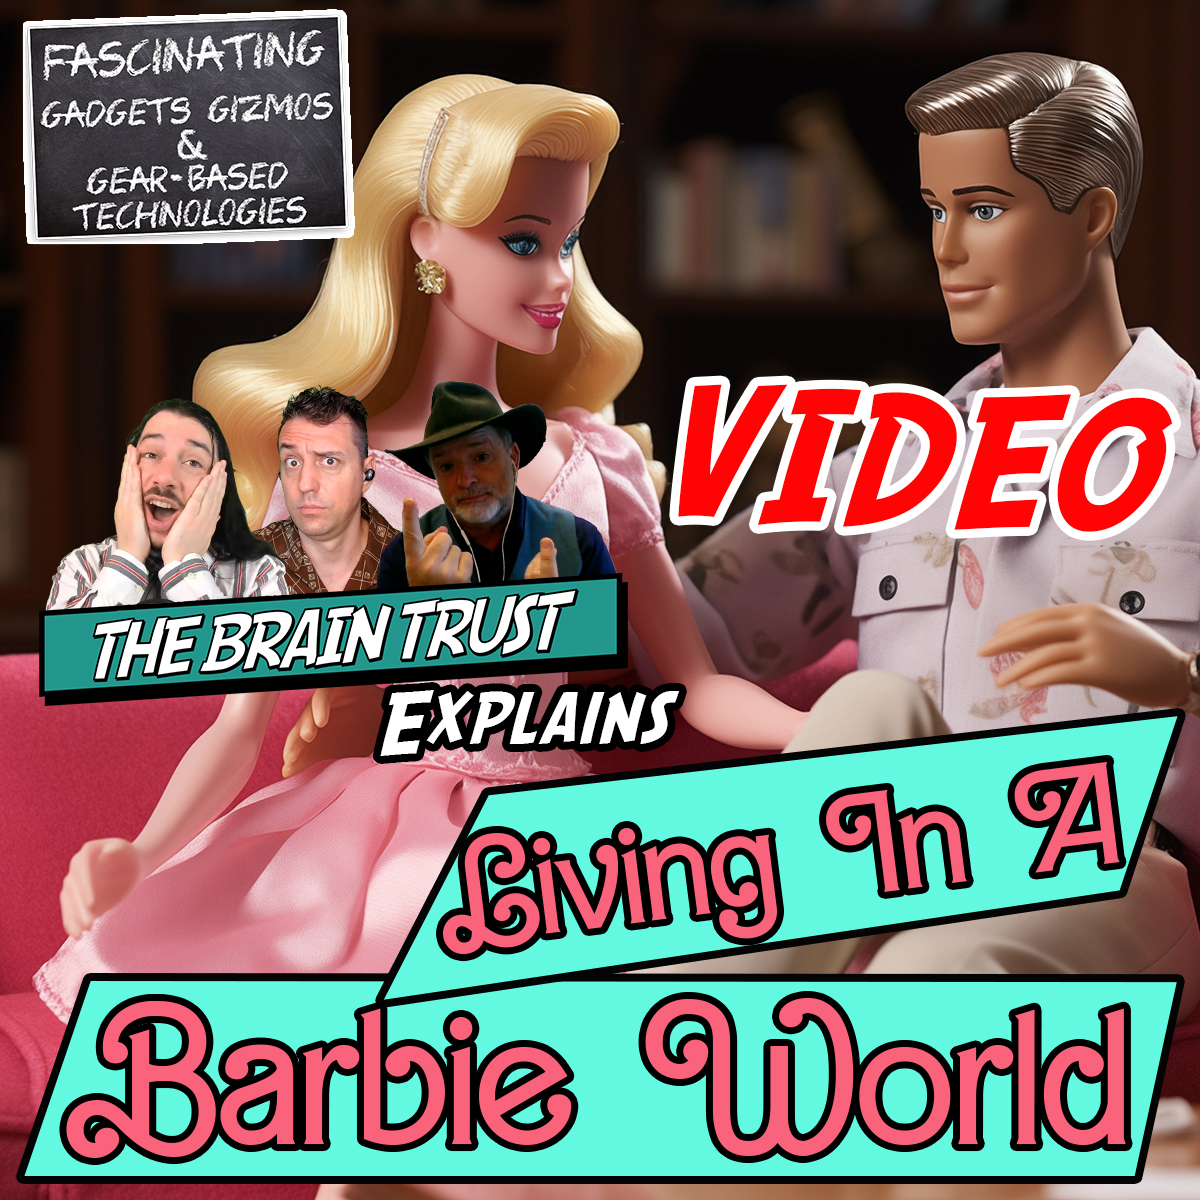 You are currently viewing Ep. 168 Living in a Barbie World (Video)